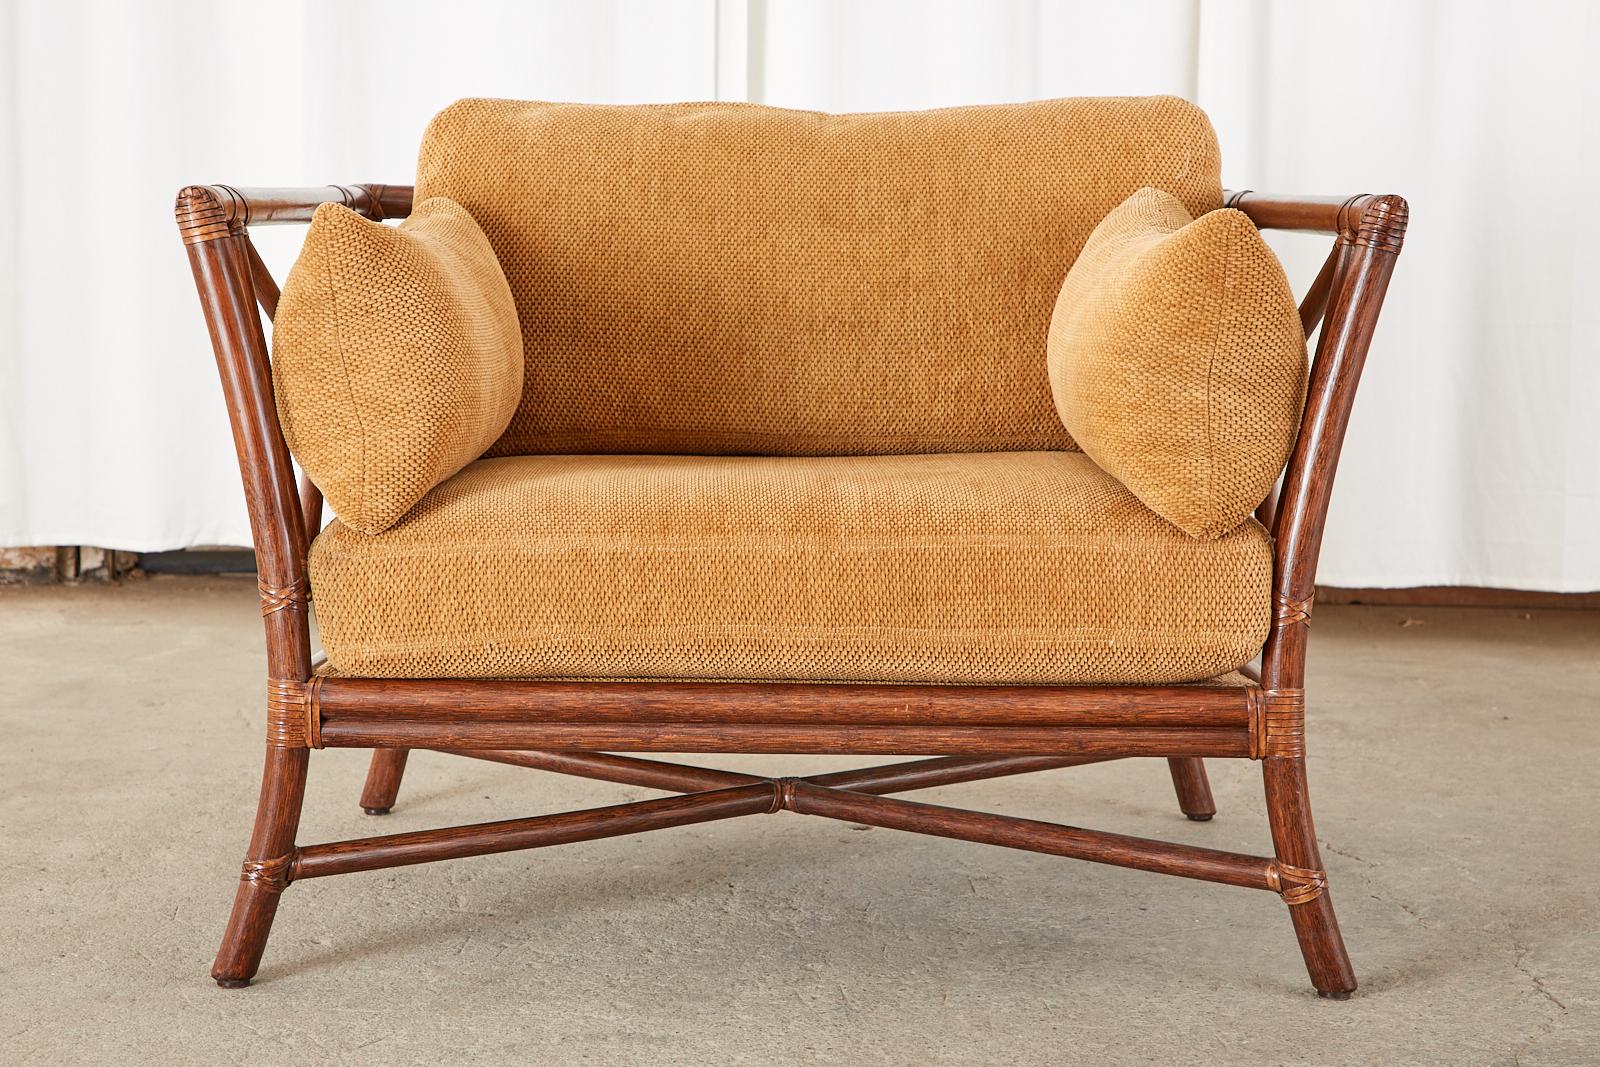 Rare, large cube chair crafted from rattan in the California organic modern style by McGuire. The lounge chair features a target motif designed by Elinor McGuire that has become an iconic McGuire design. The rattan frame is made on a large scale an